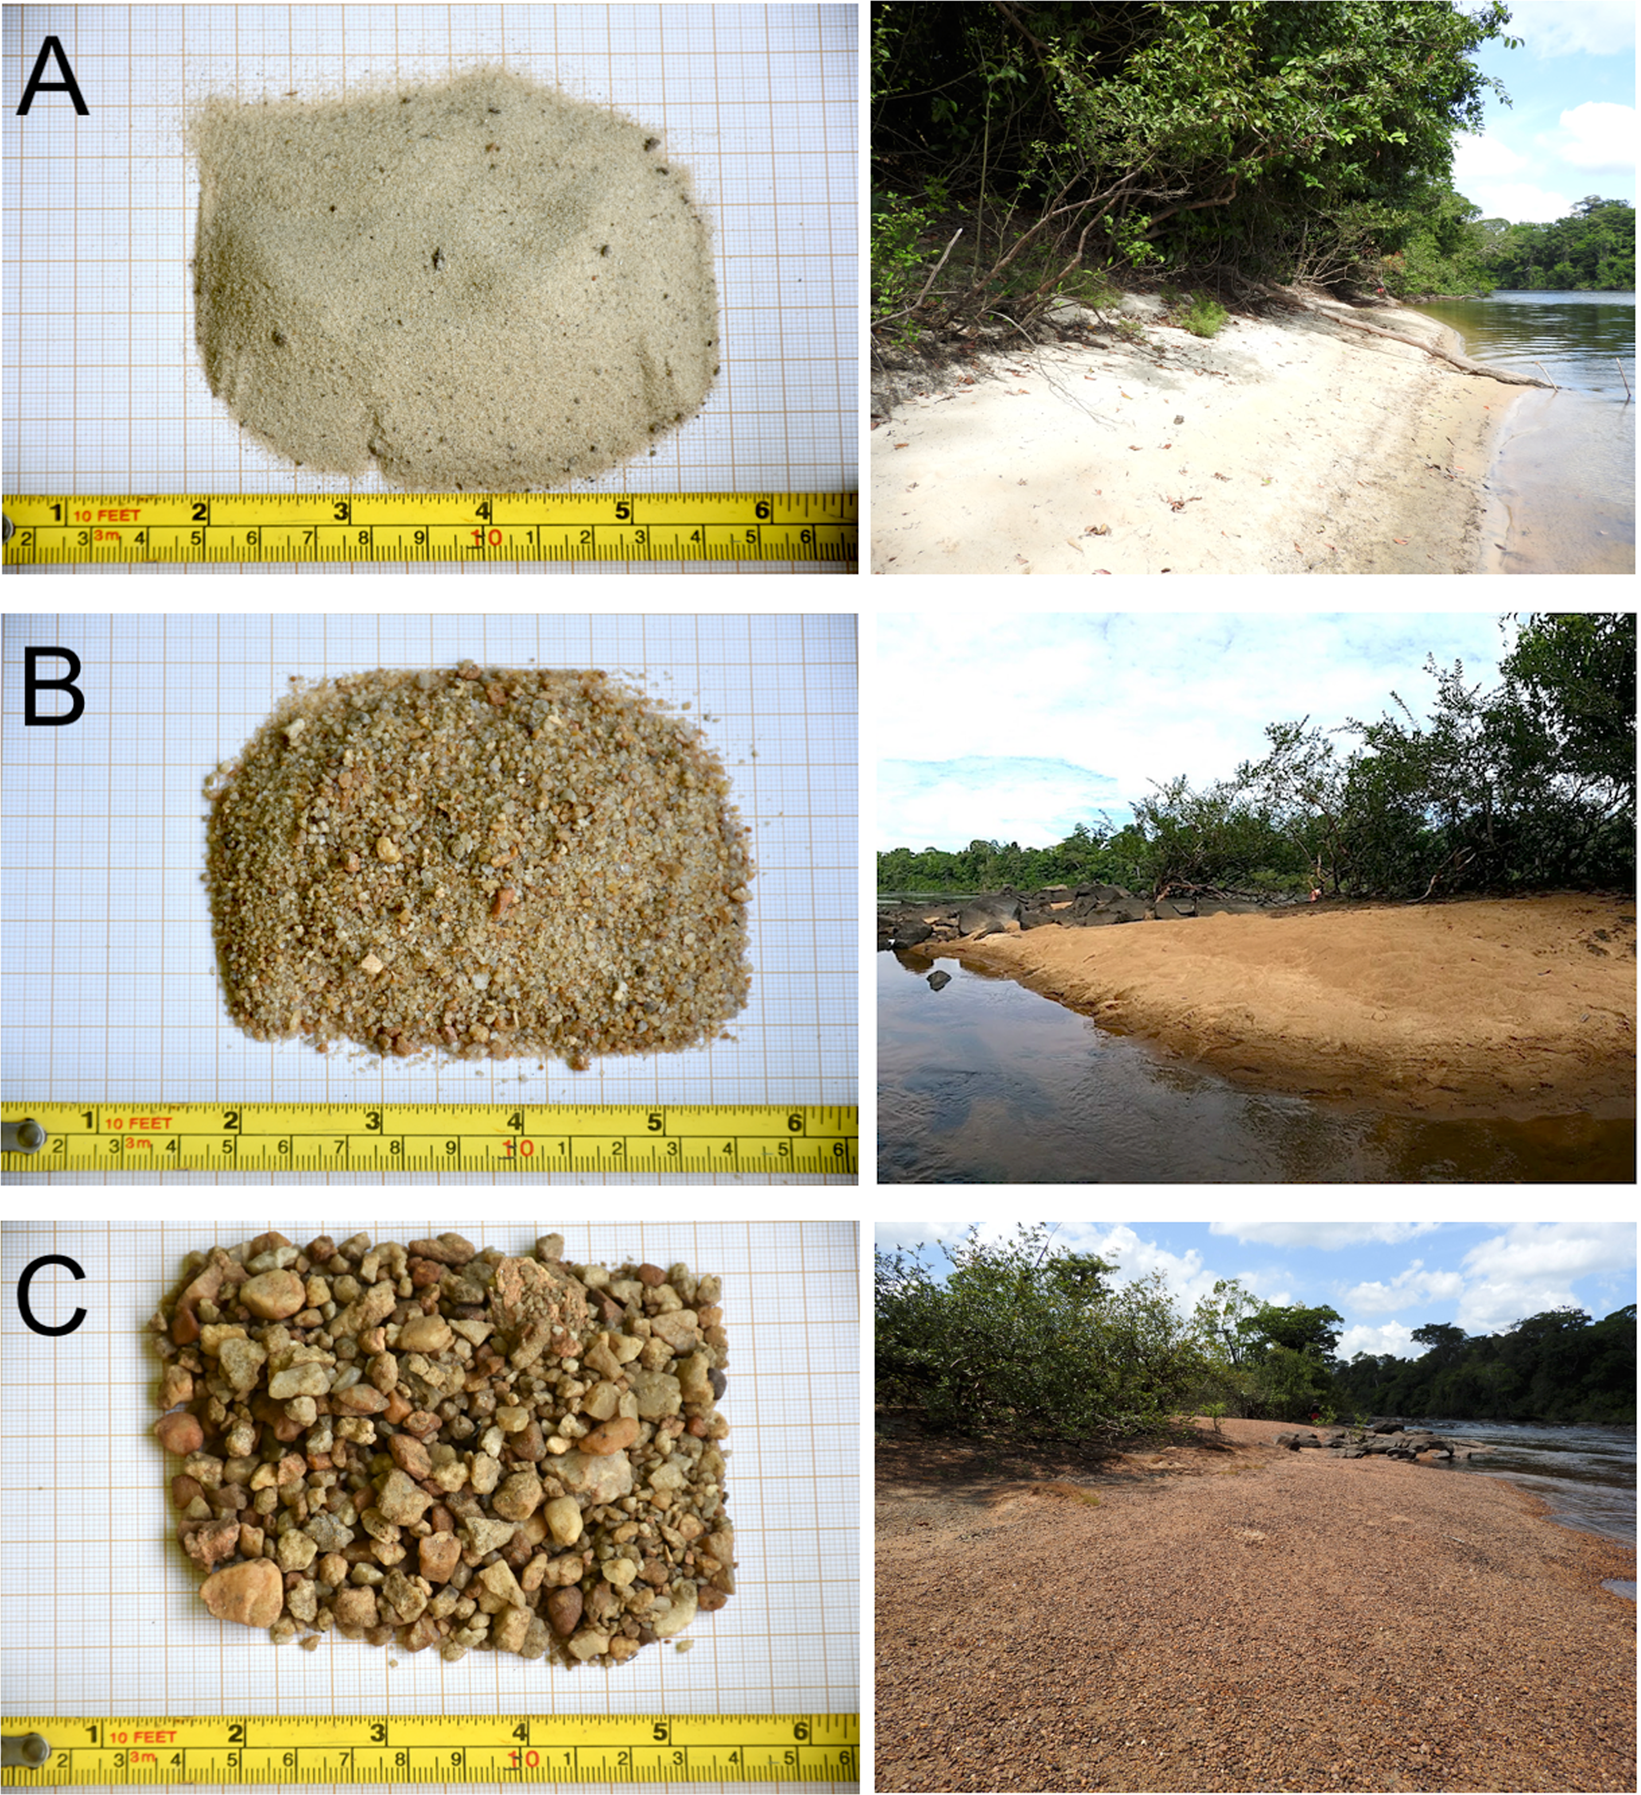 Substrate influences human removal of freshwater turtle nests in the  eastern Brazilian Amazon | Scientific Reports